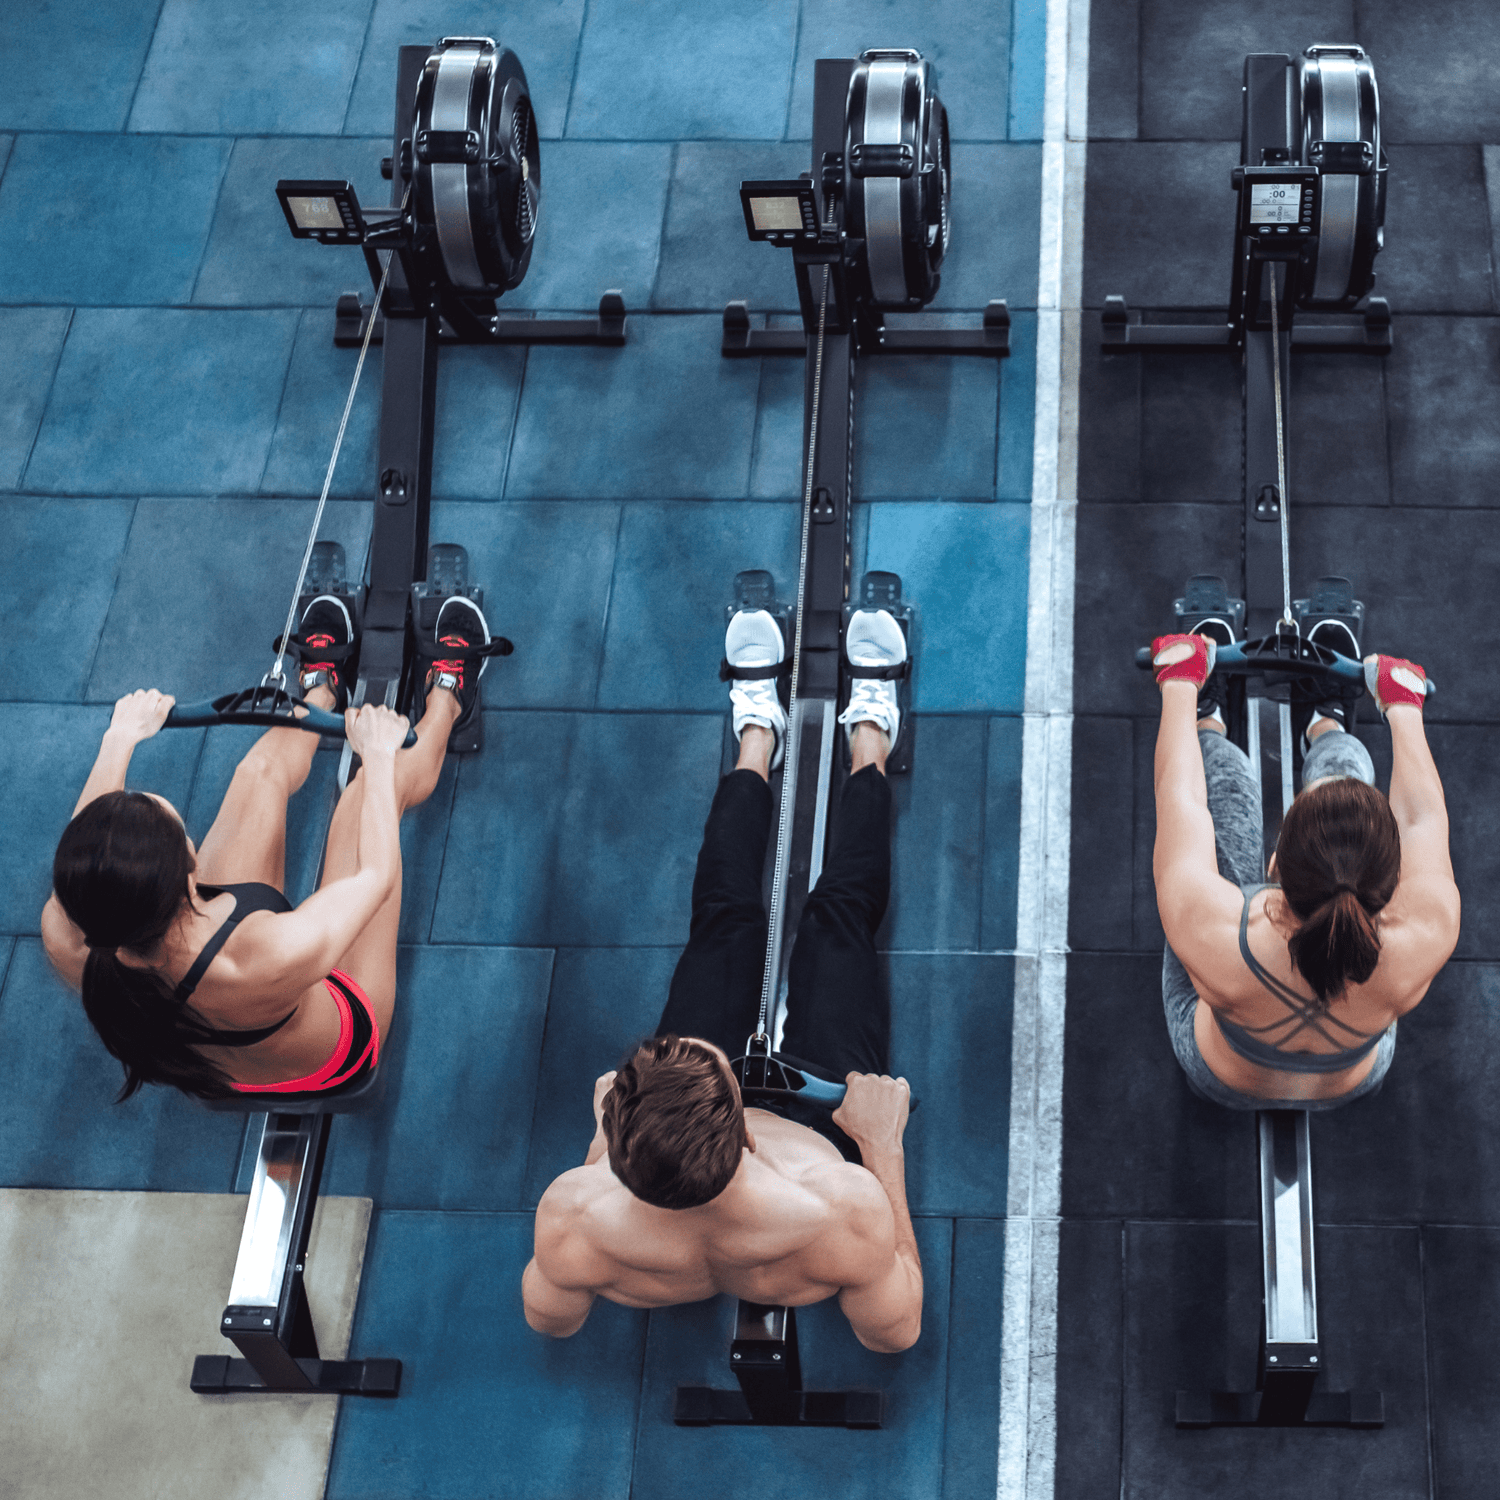 Three People Rowing Depicting Cardio Equipment A2S Fitness Homepage